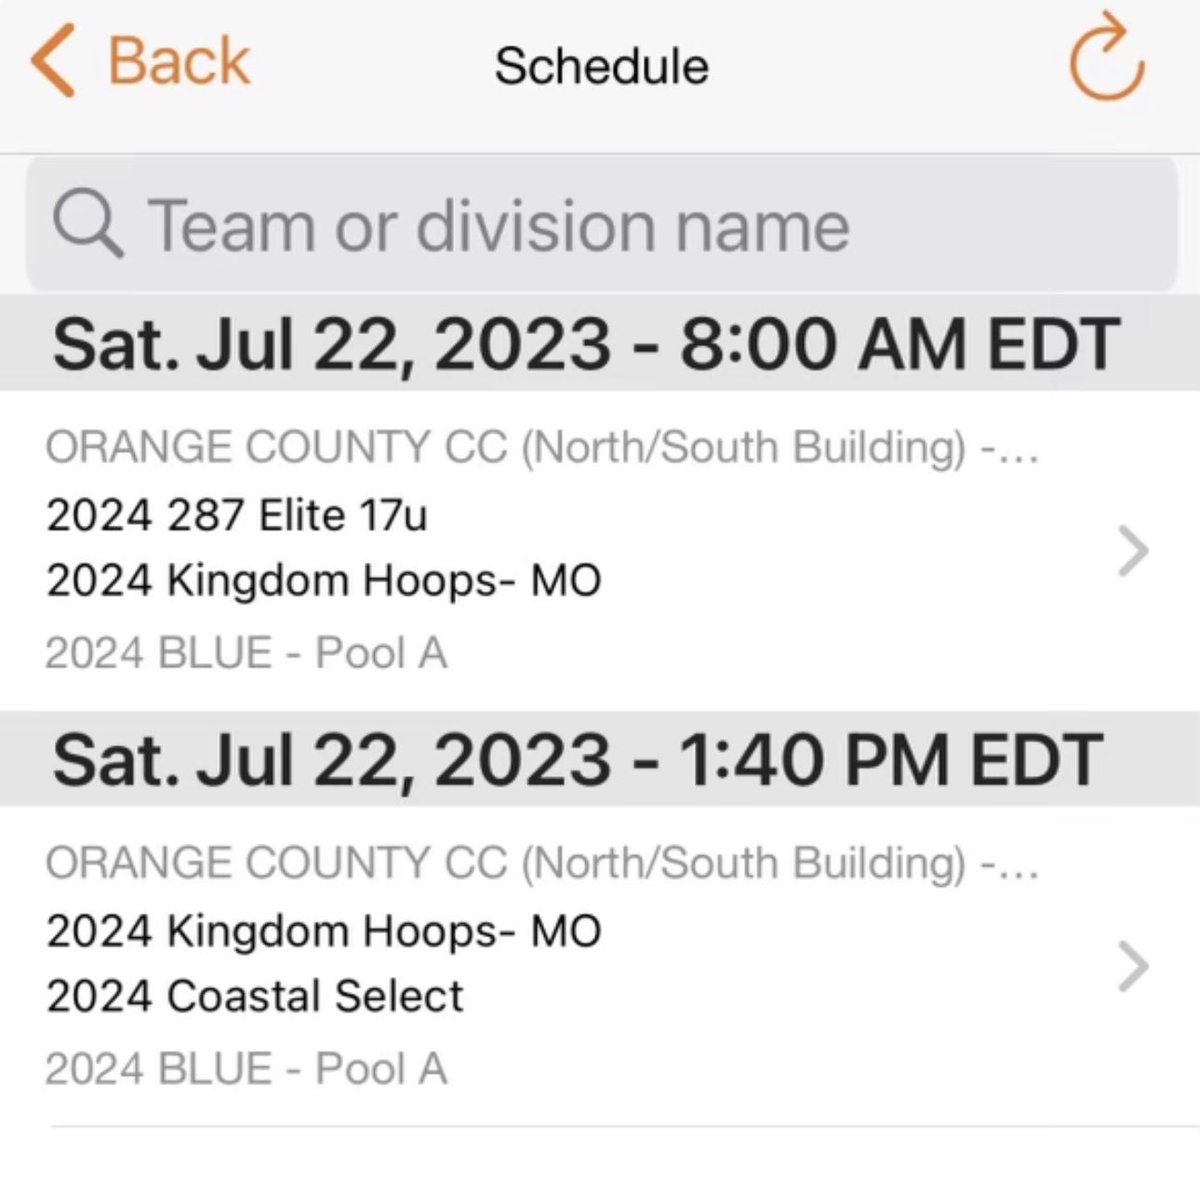 Bittersweet heading to my very last AAU tournament. Would love for you to come check my team out in Orlando!